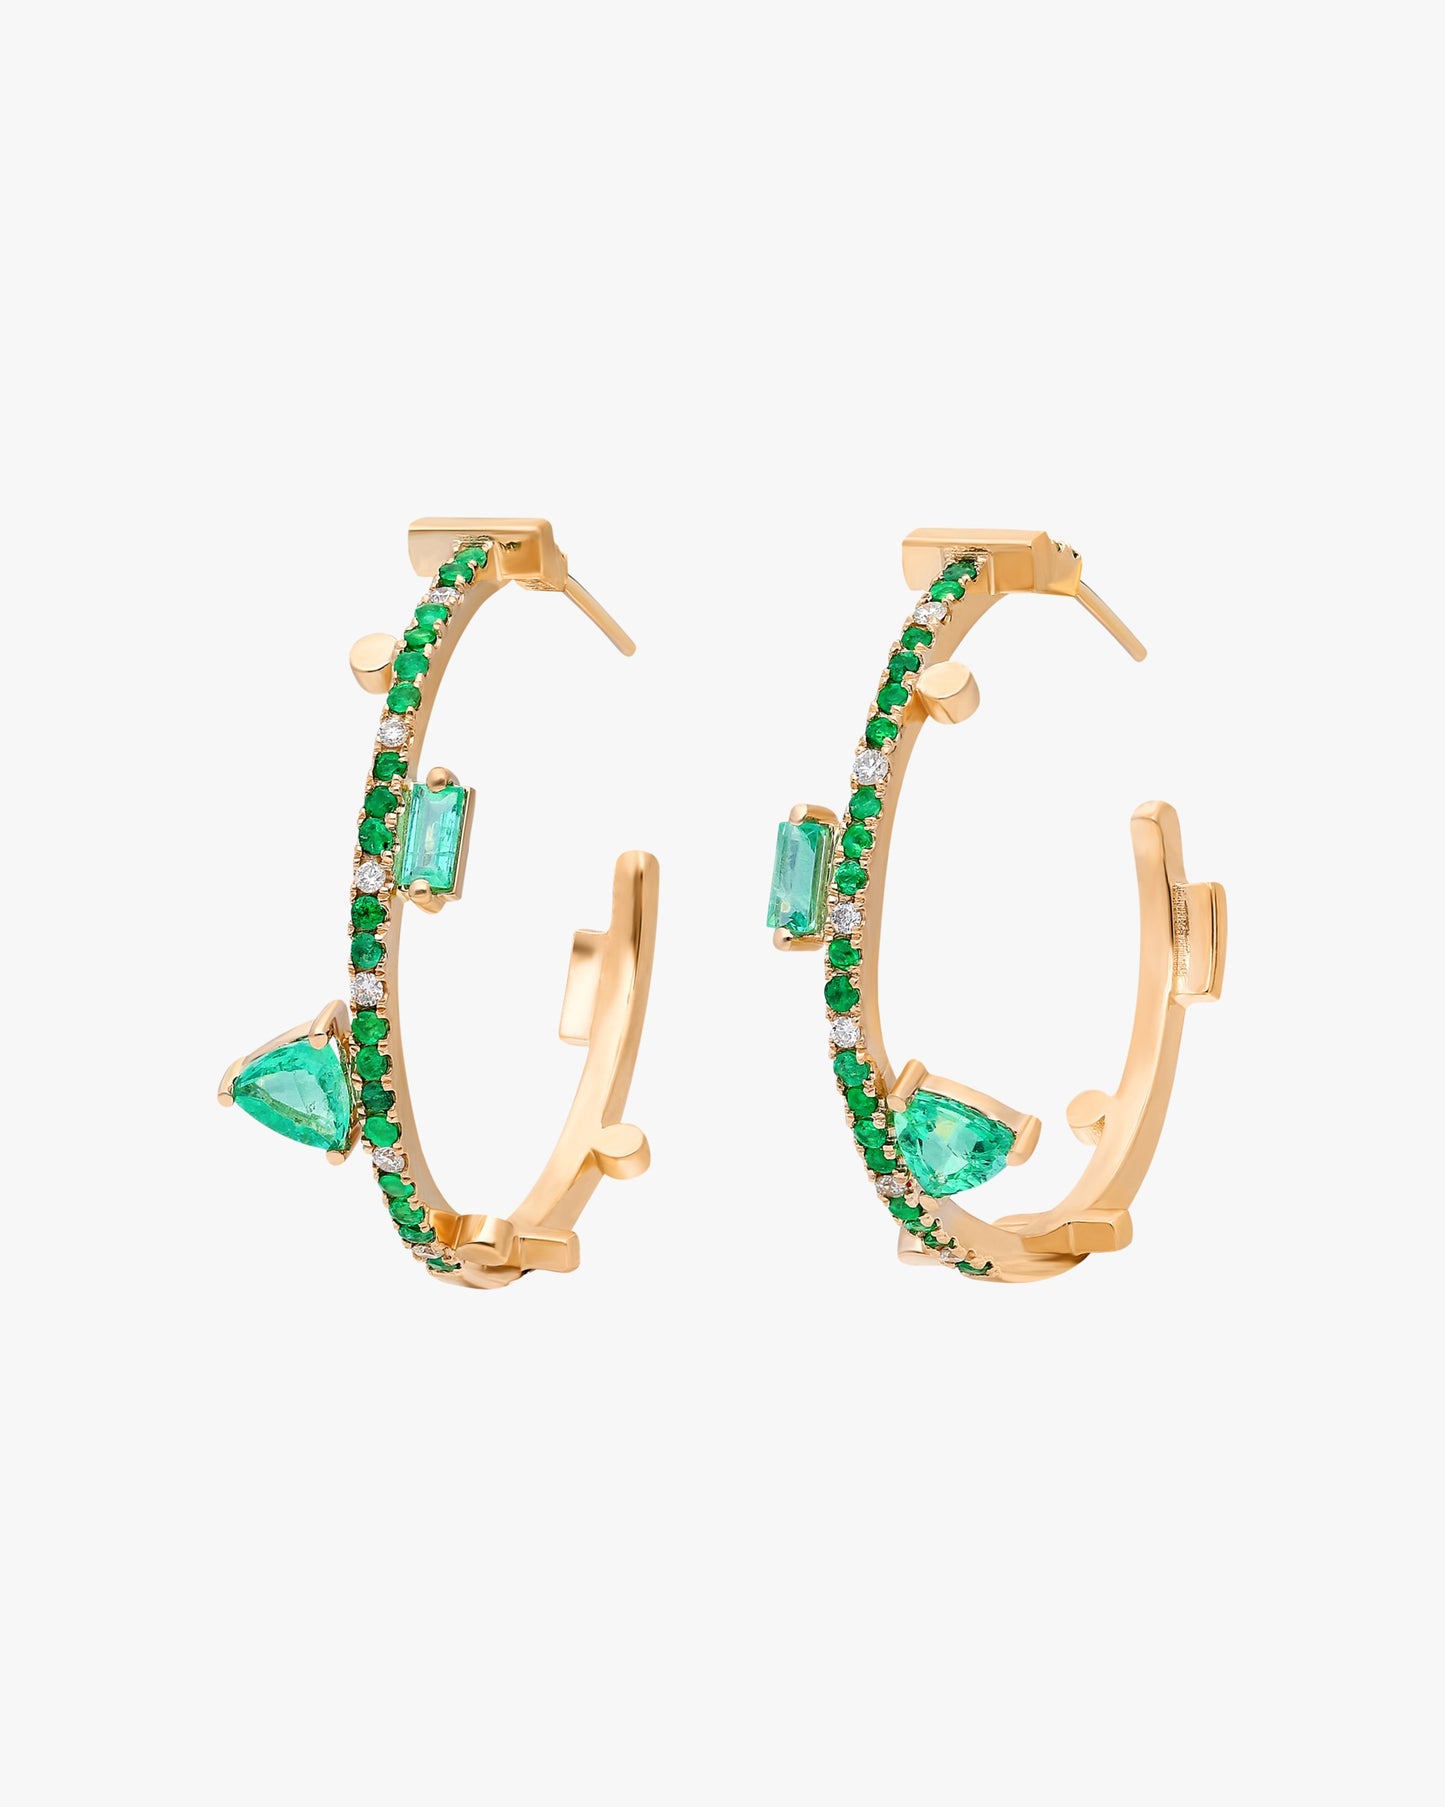 14k yellow gold and emerald Emerald: 1.56 tcw Spot clean Made in Turkey  Instantly enliven your ensemble with these 14k gold hoop earrings that are trimmed in vibrant emeralds and feature geometric stations for an edgy look. 